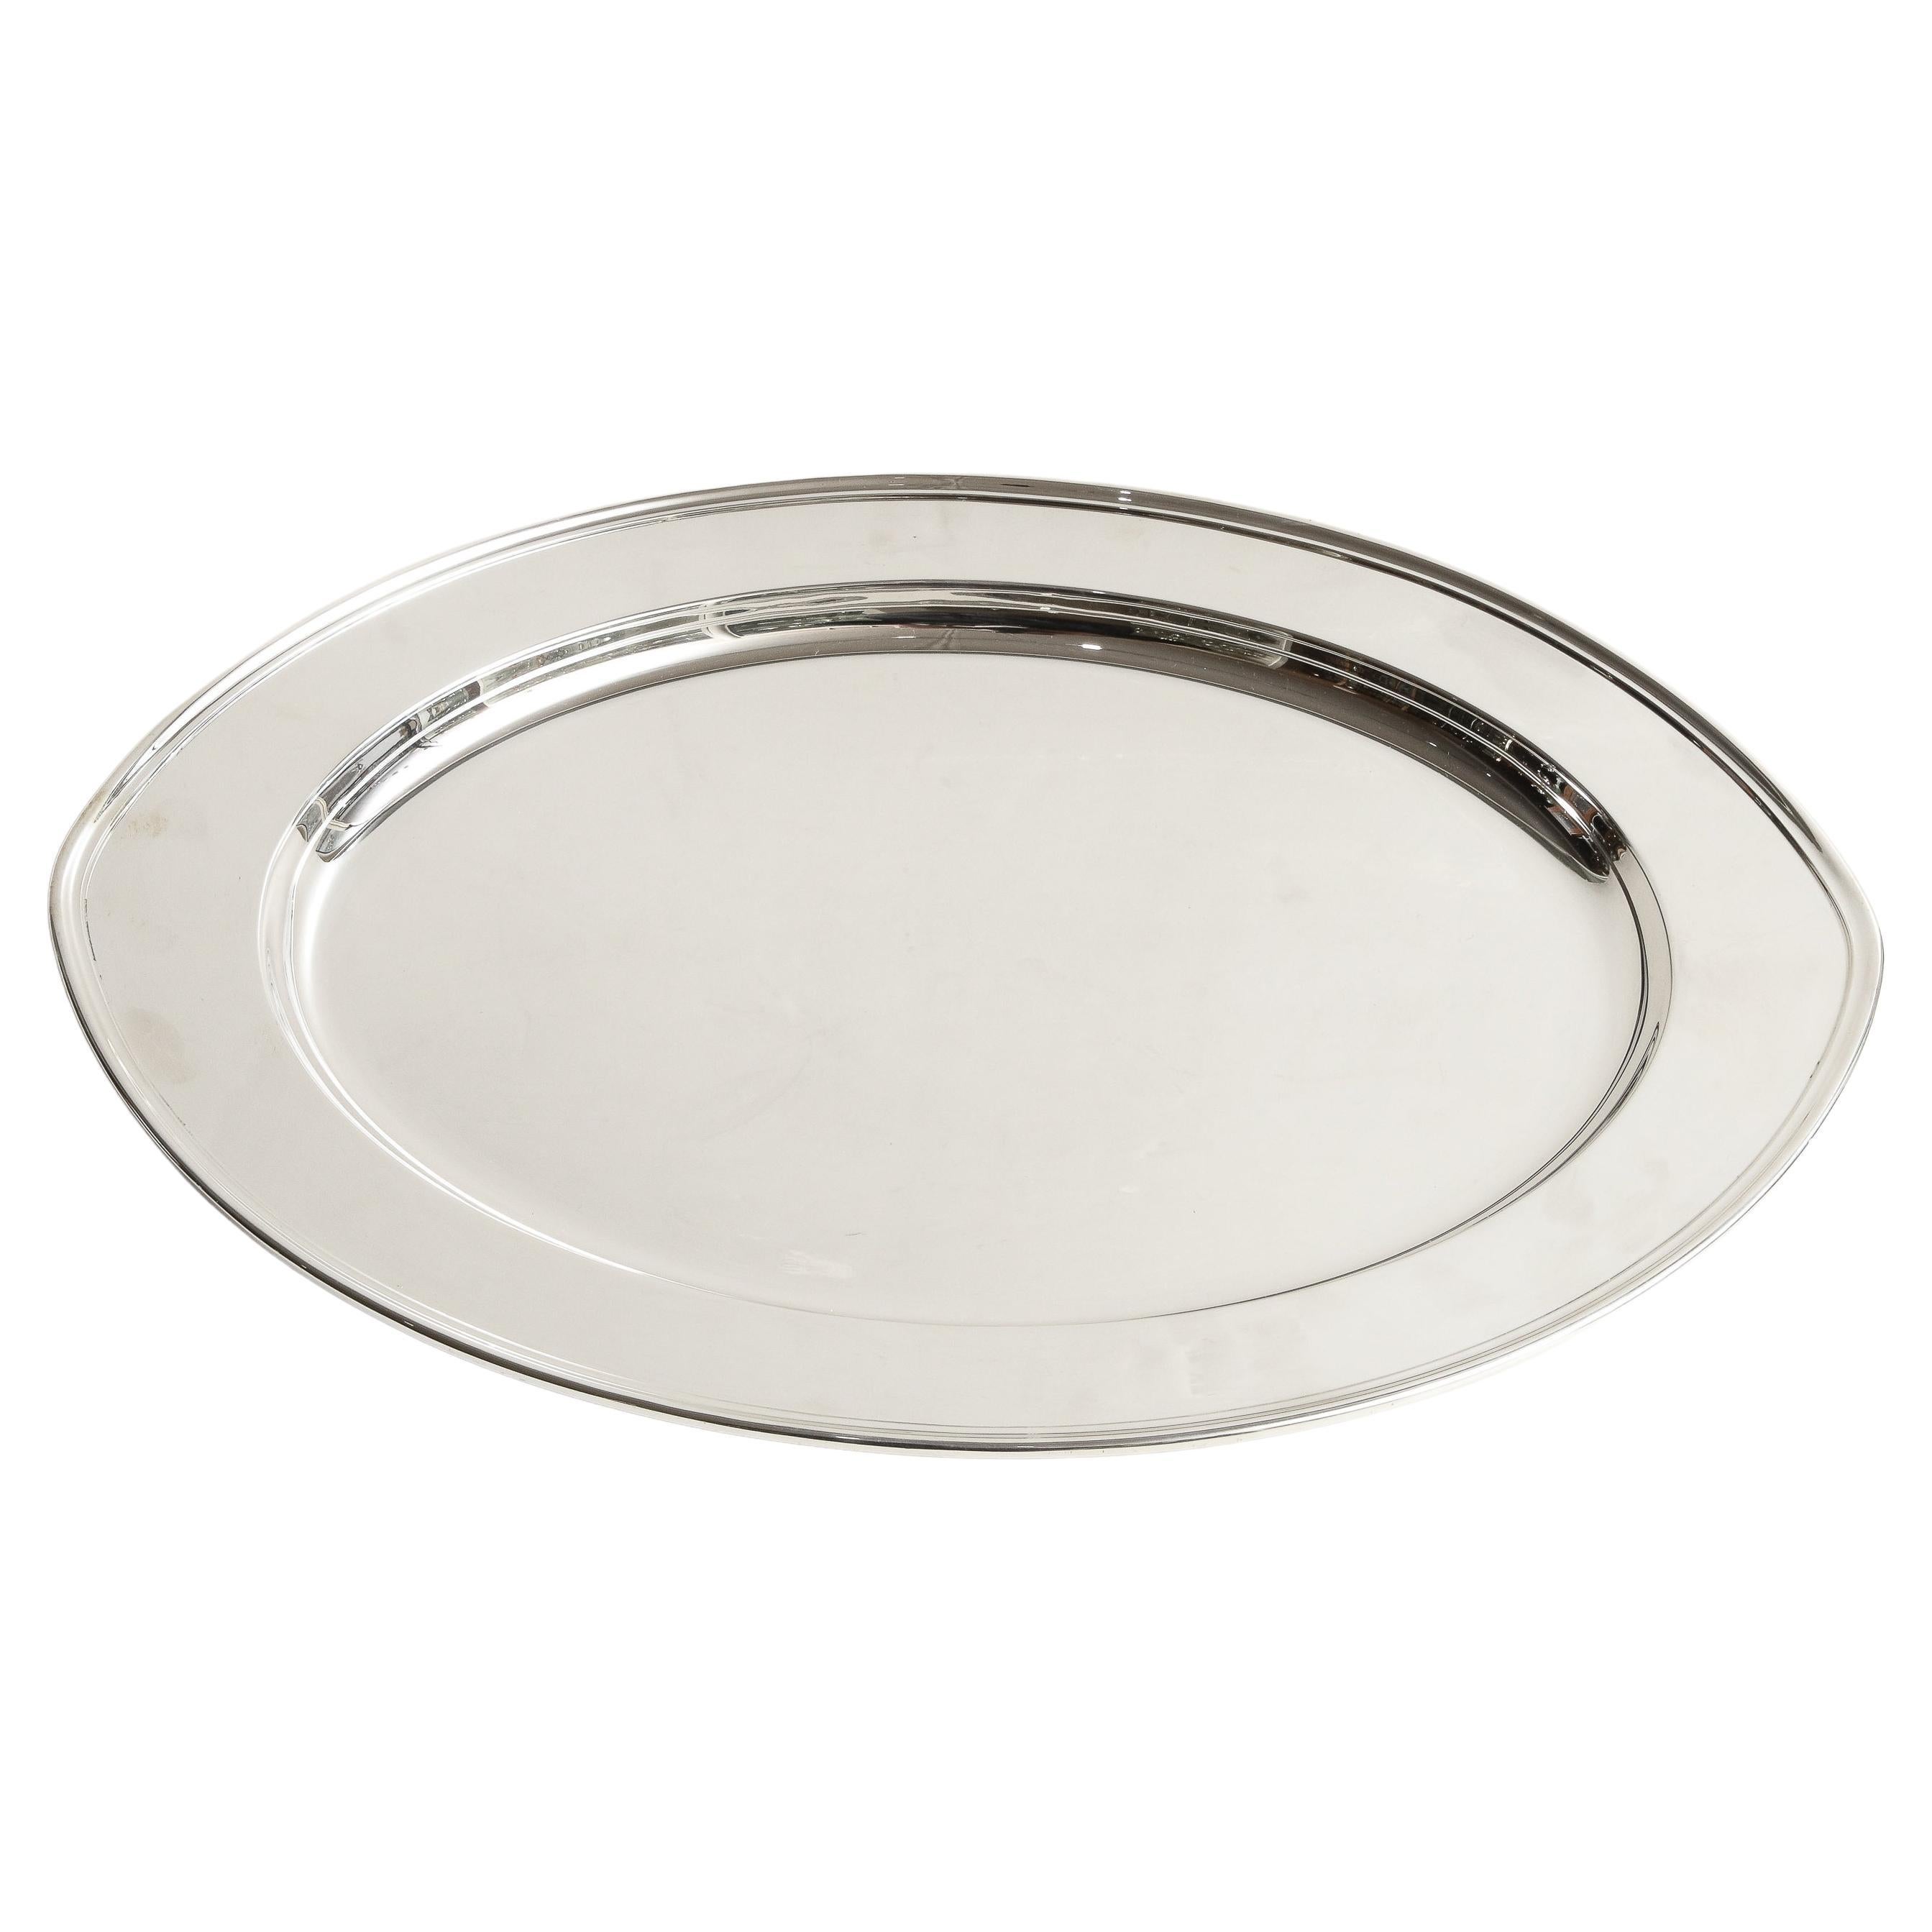 Large Art Deco Period Solid Sterling Silver Serving Platter By Gorham For Sale